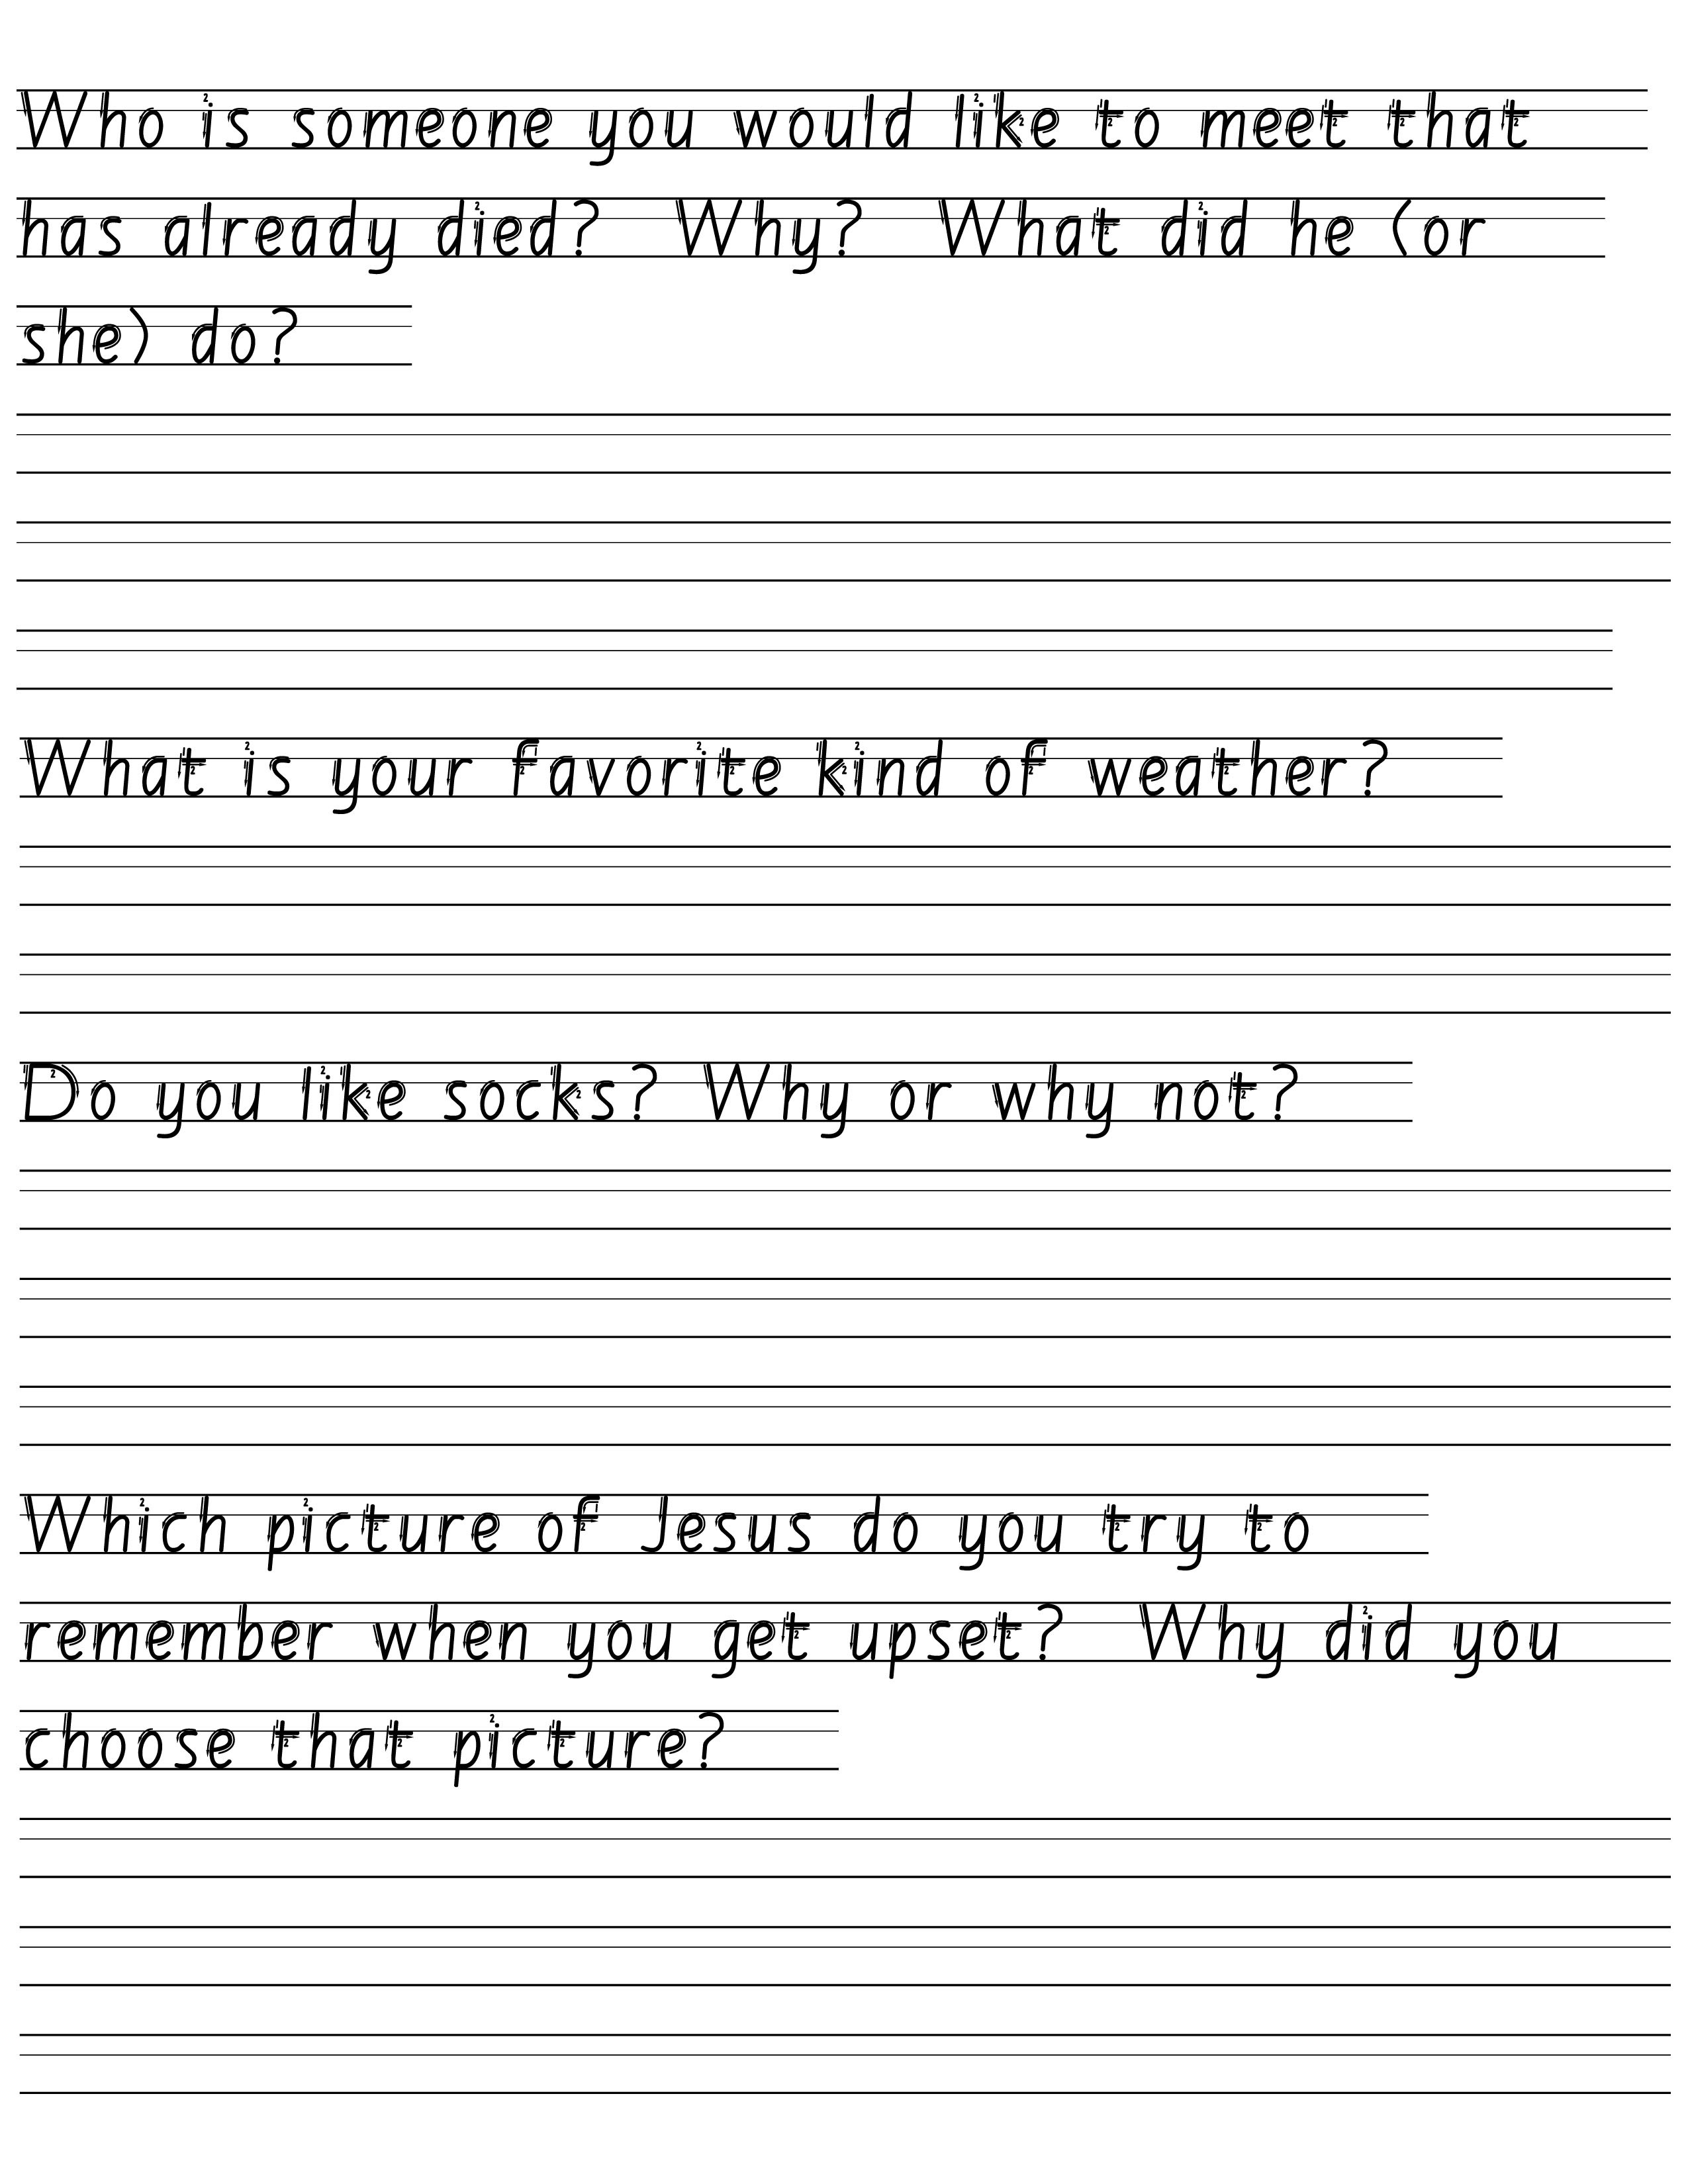 creative writing worksheets for grade 1 db excelcom